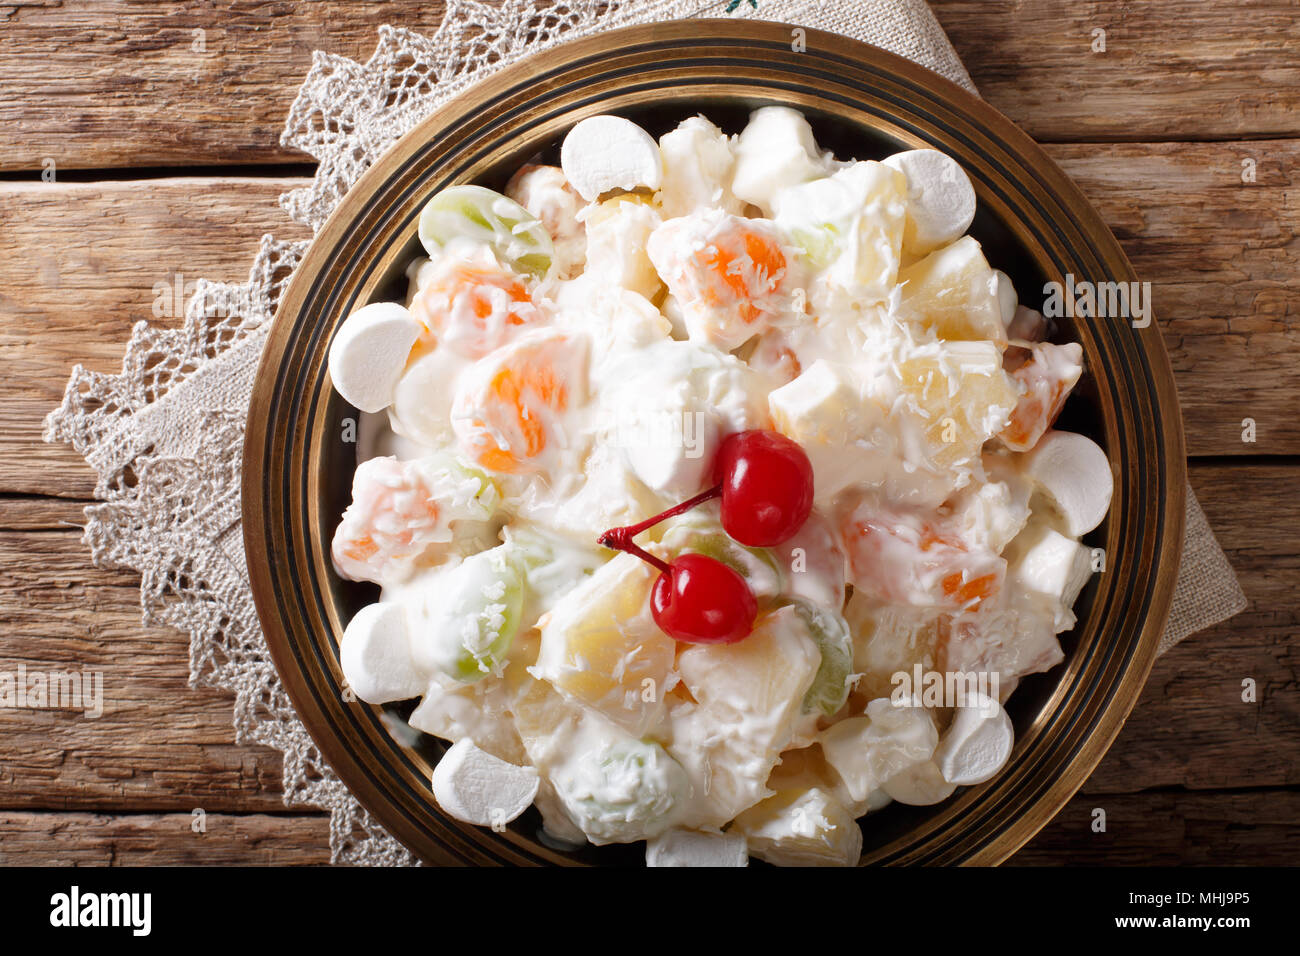 Light fruit salad Ambrosia with marshmallow and vanilla yogurt close-up on a plate. horizontal top view from above Stock Photo